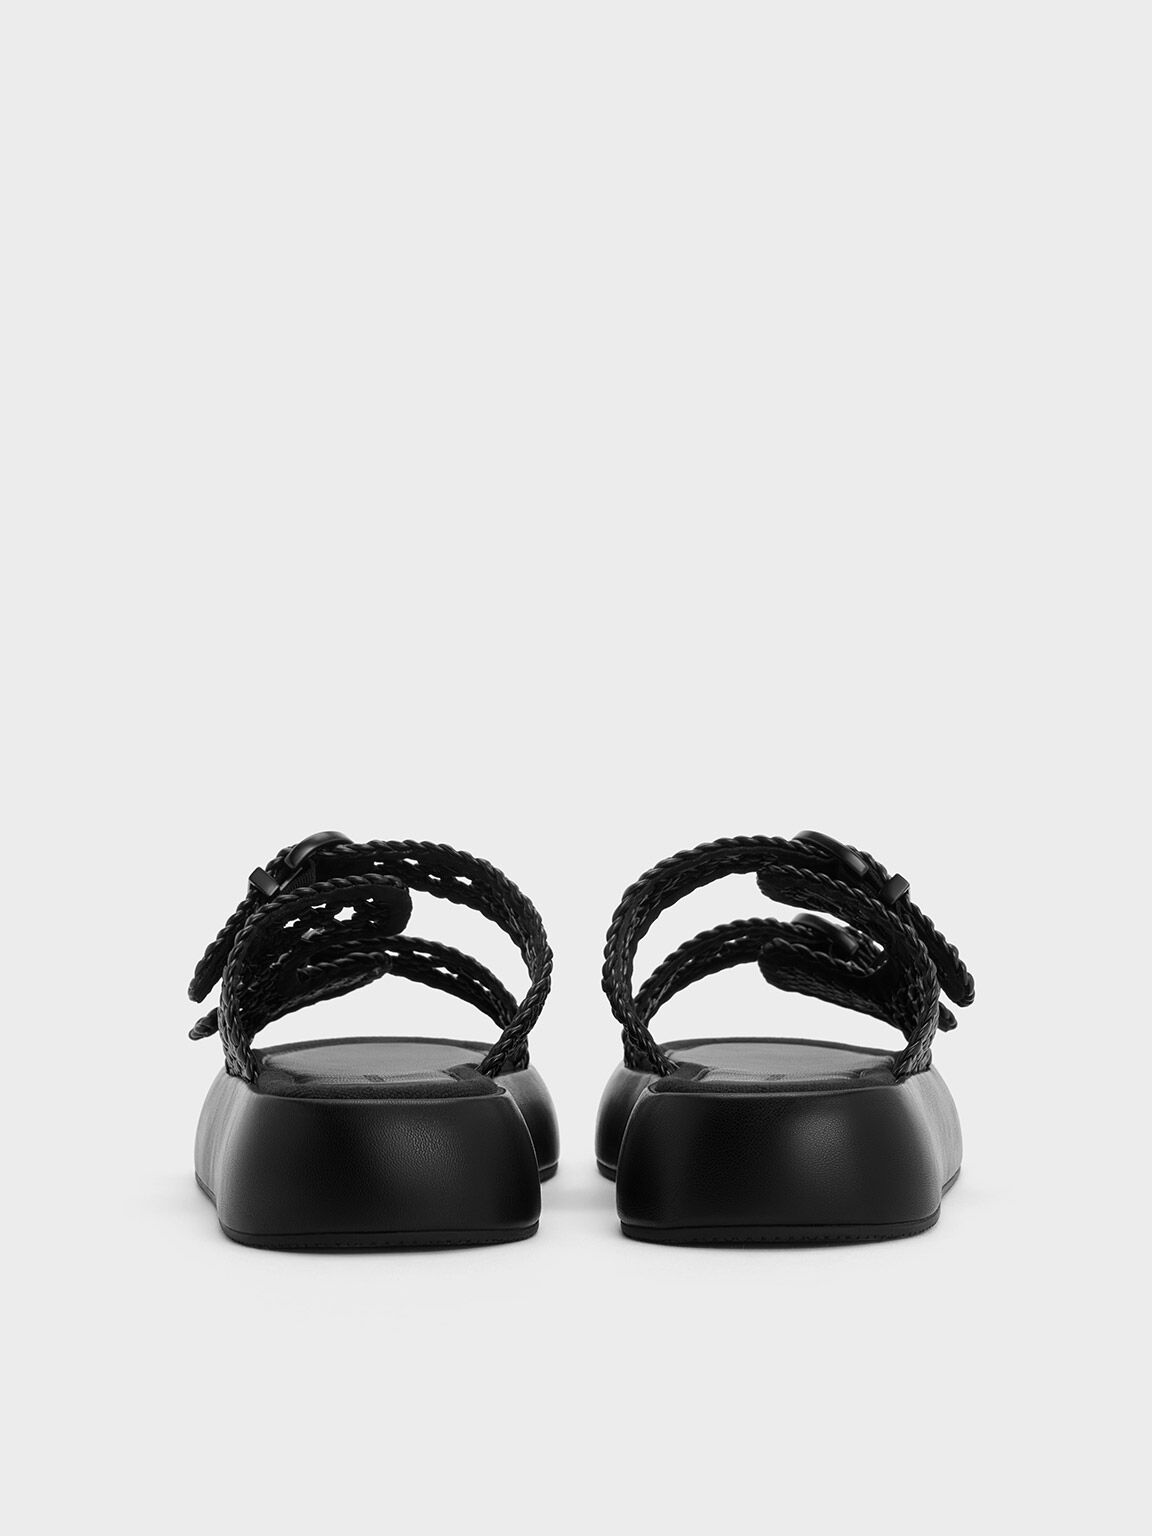 Woven Double-Strap Buckled Sandals, Black, hi-res